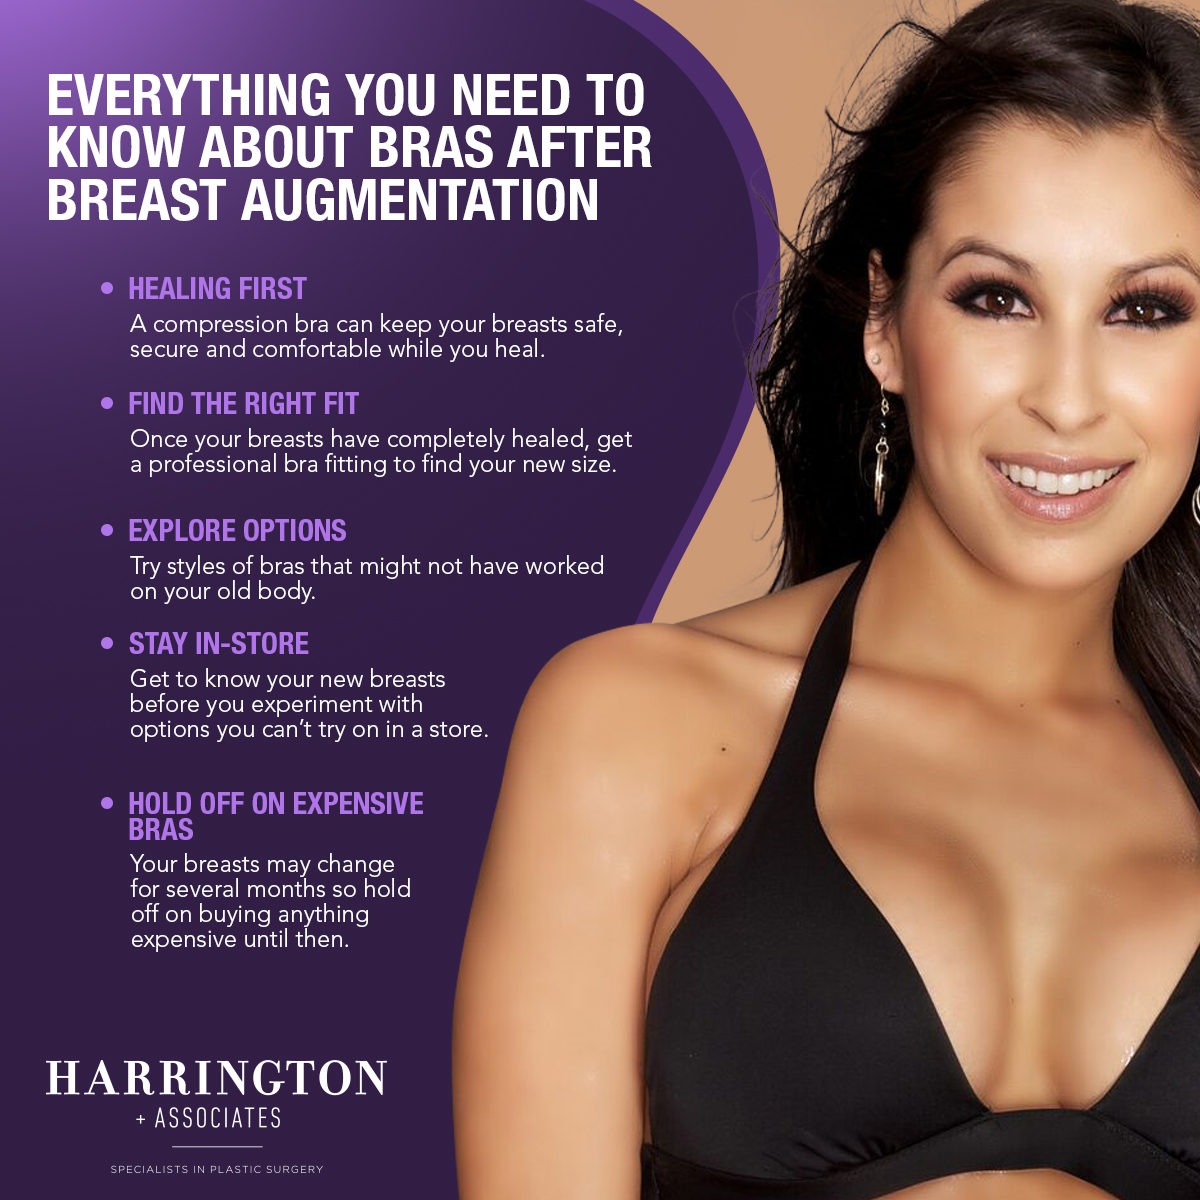 Everything You Need To Know About Bras After Breast Augmentation [Infographic]